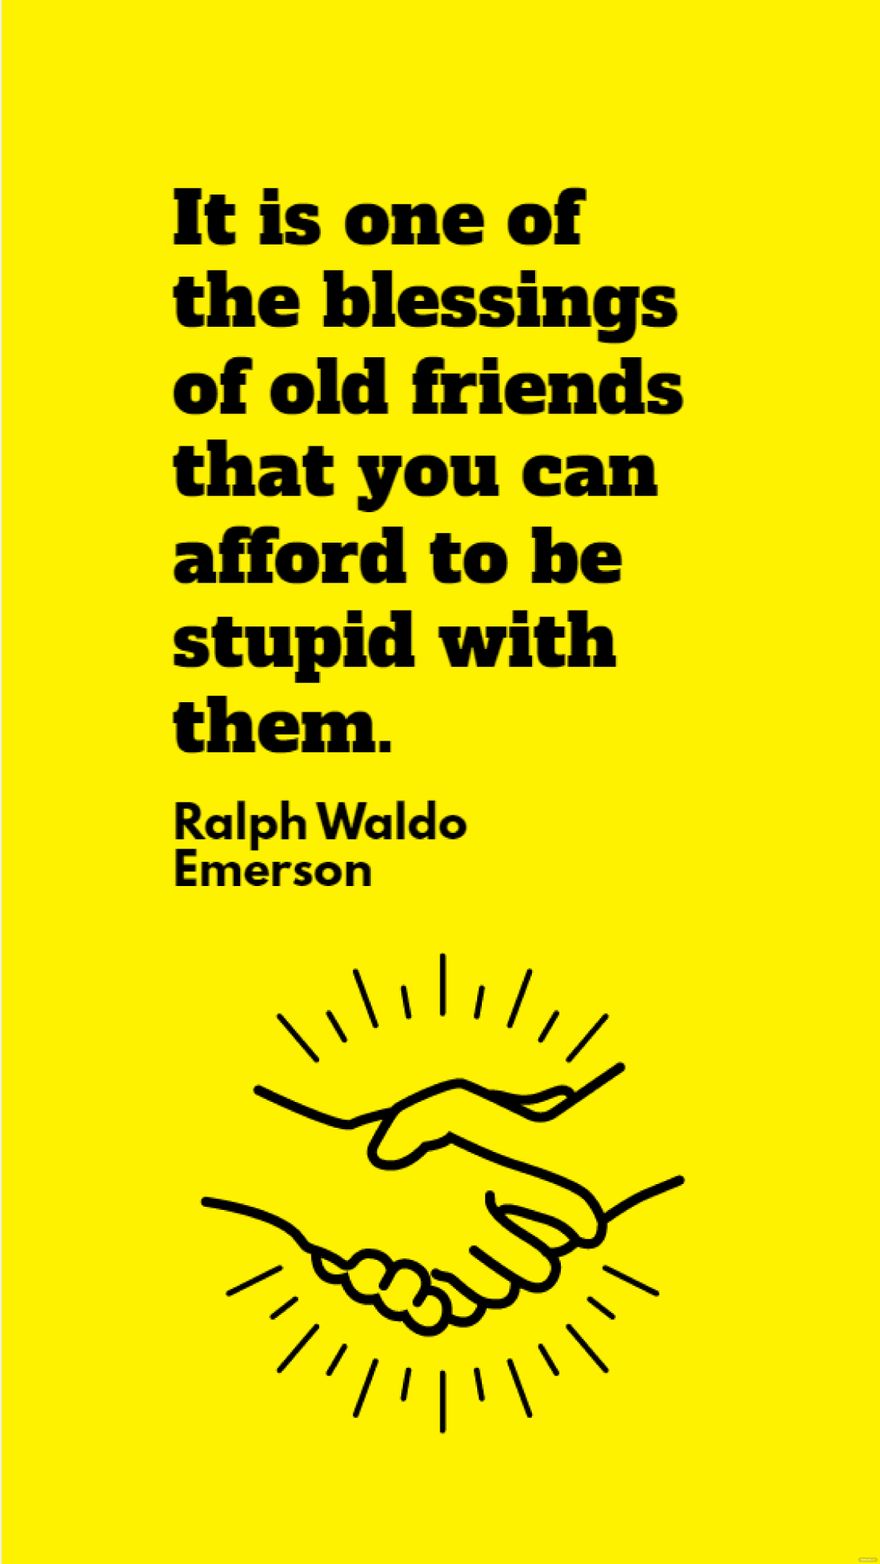 Ralph Waldo Emerson - It is one of the blessings of old friends that you can afford to be stupid with them.